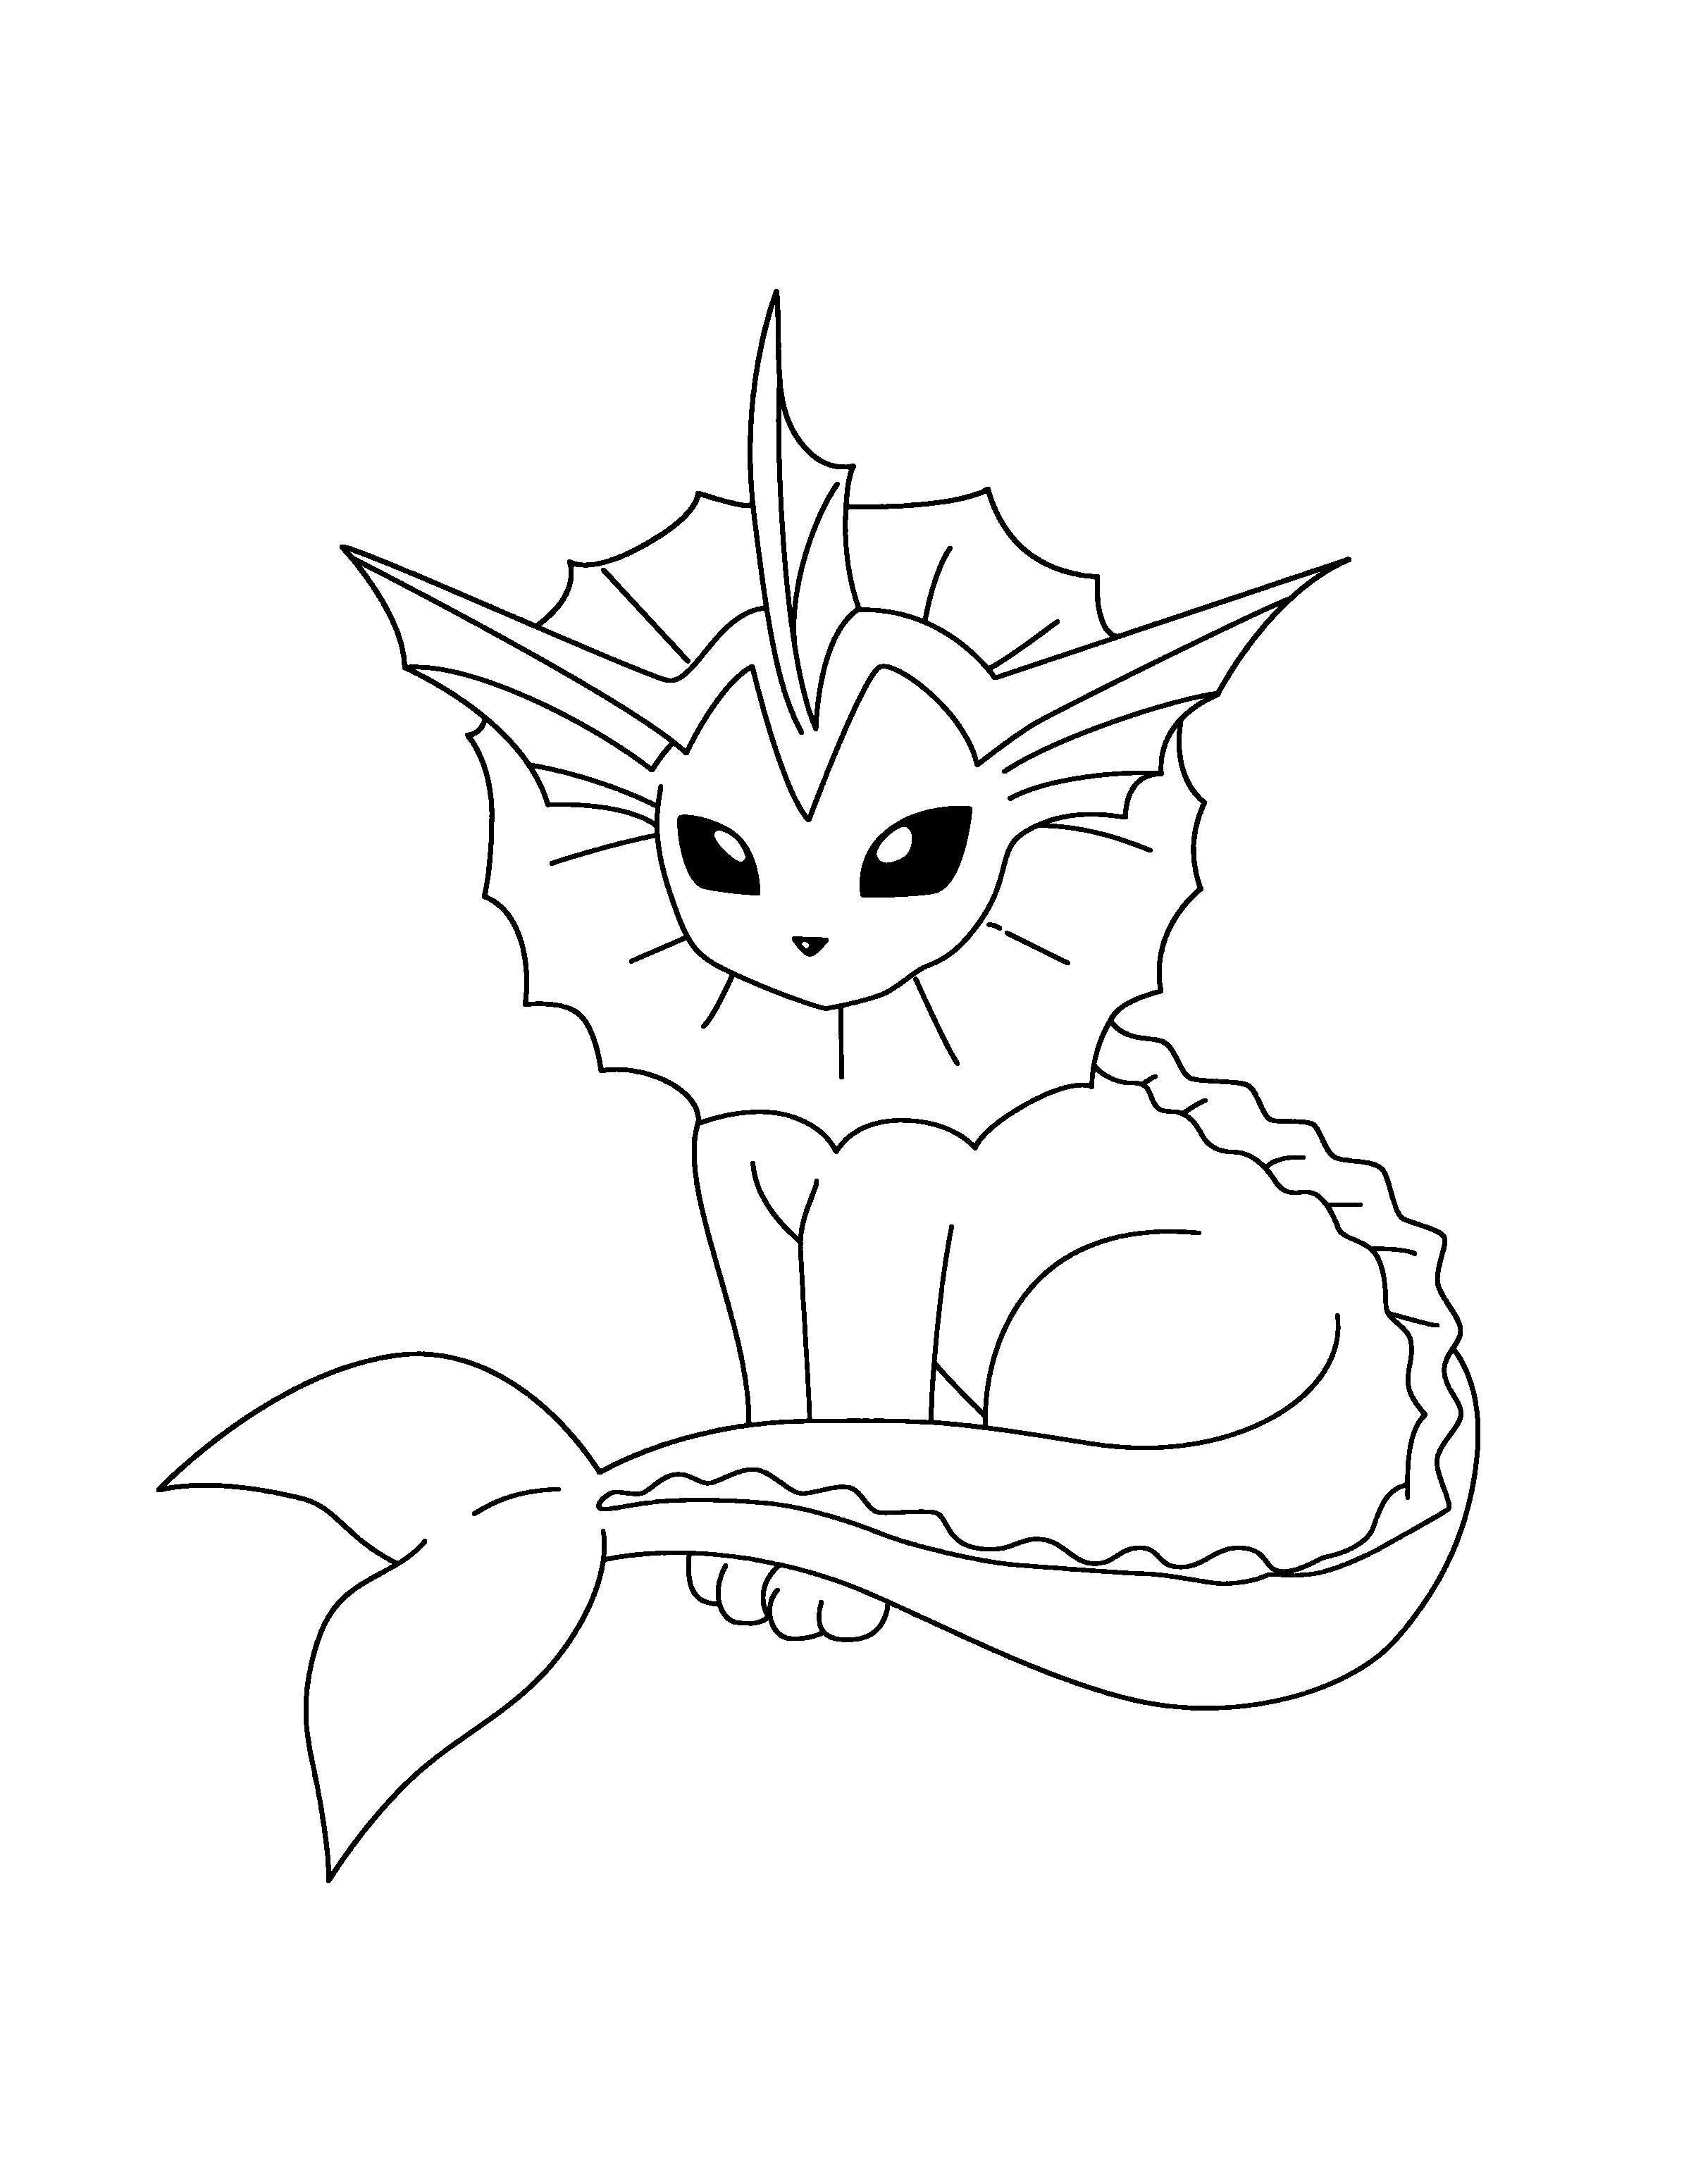 animated-coloring-pages-pokemon-image-0203